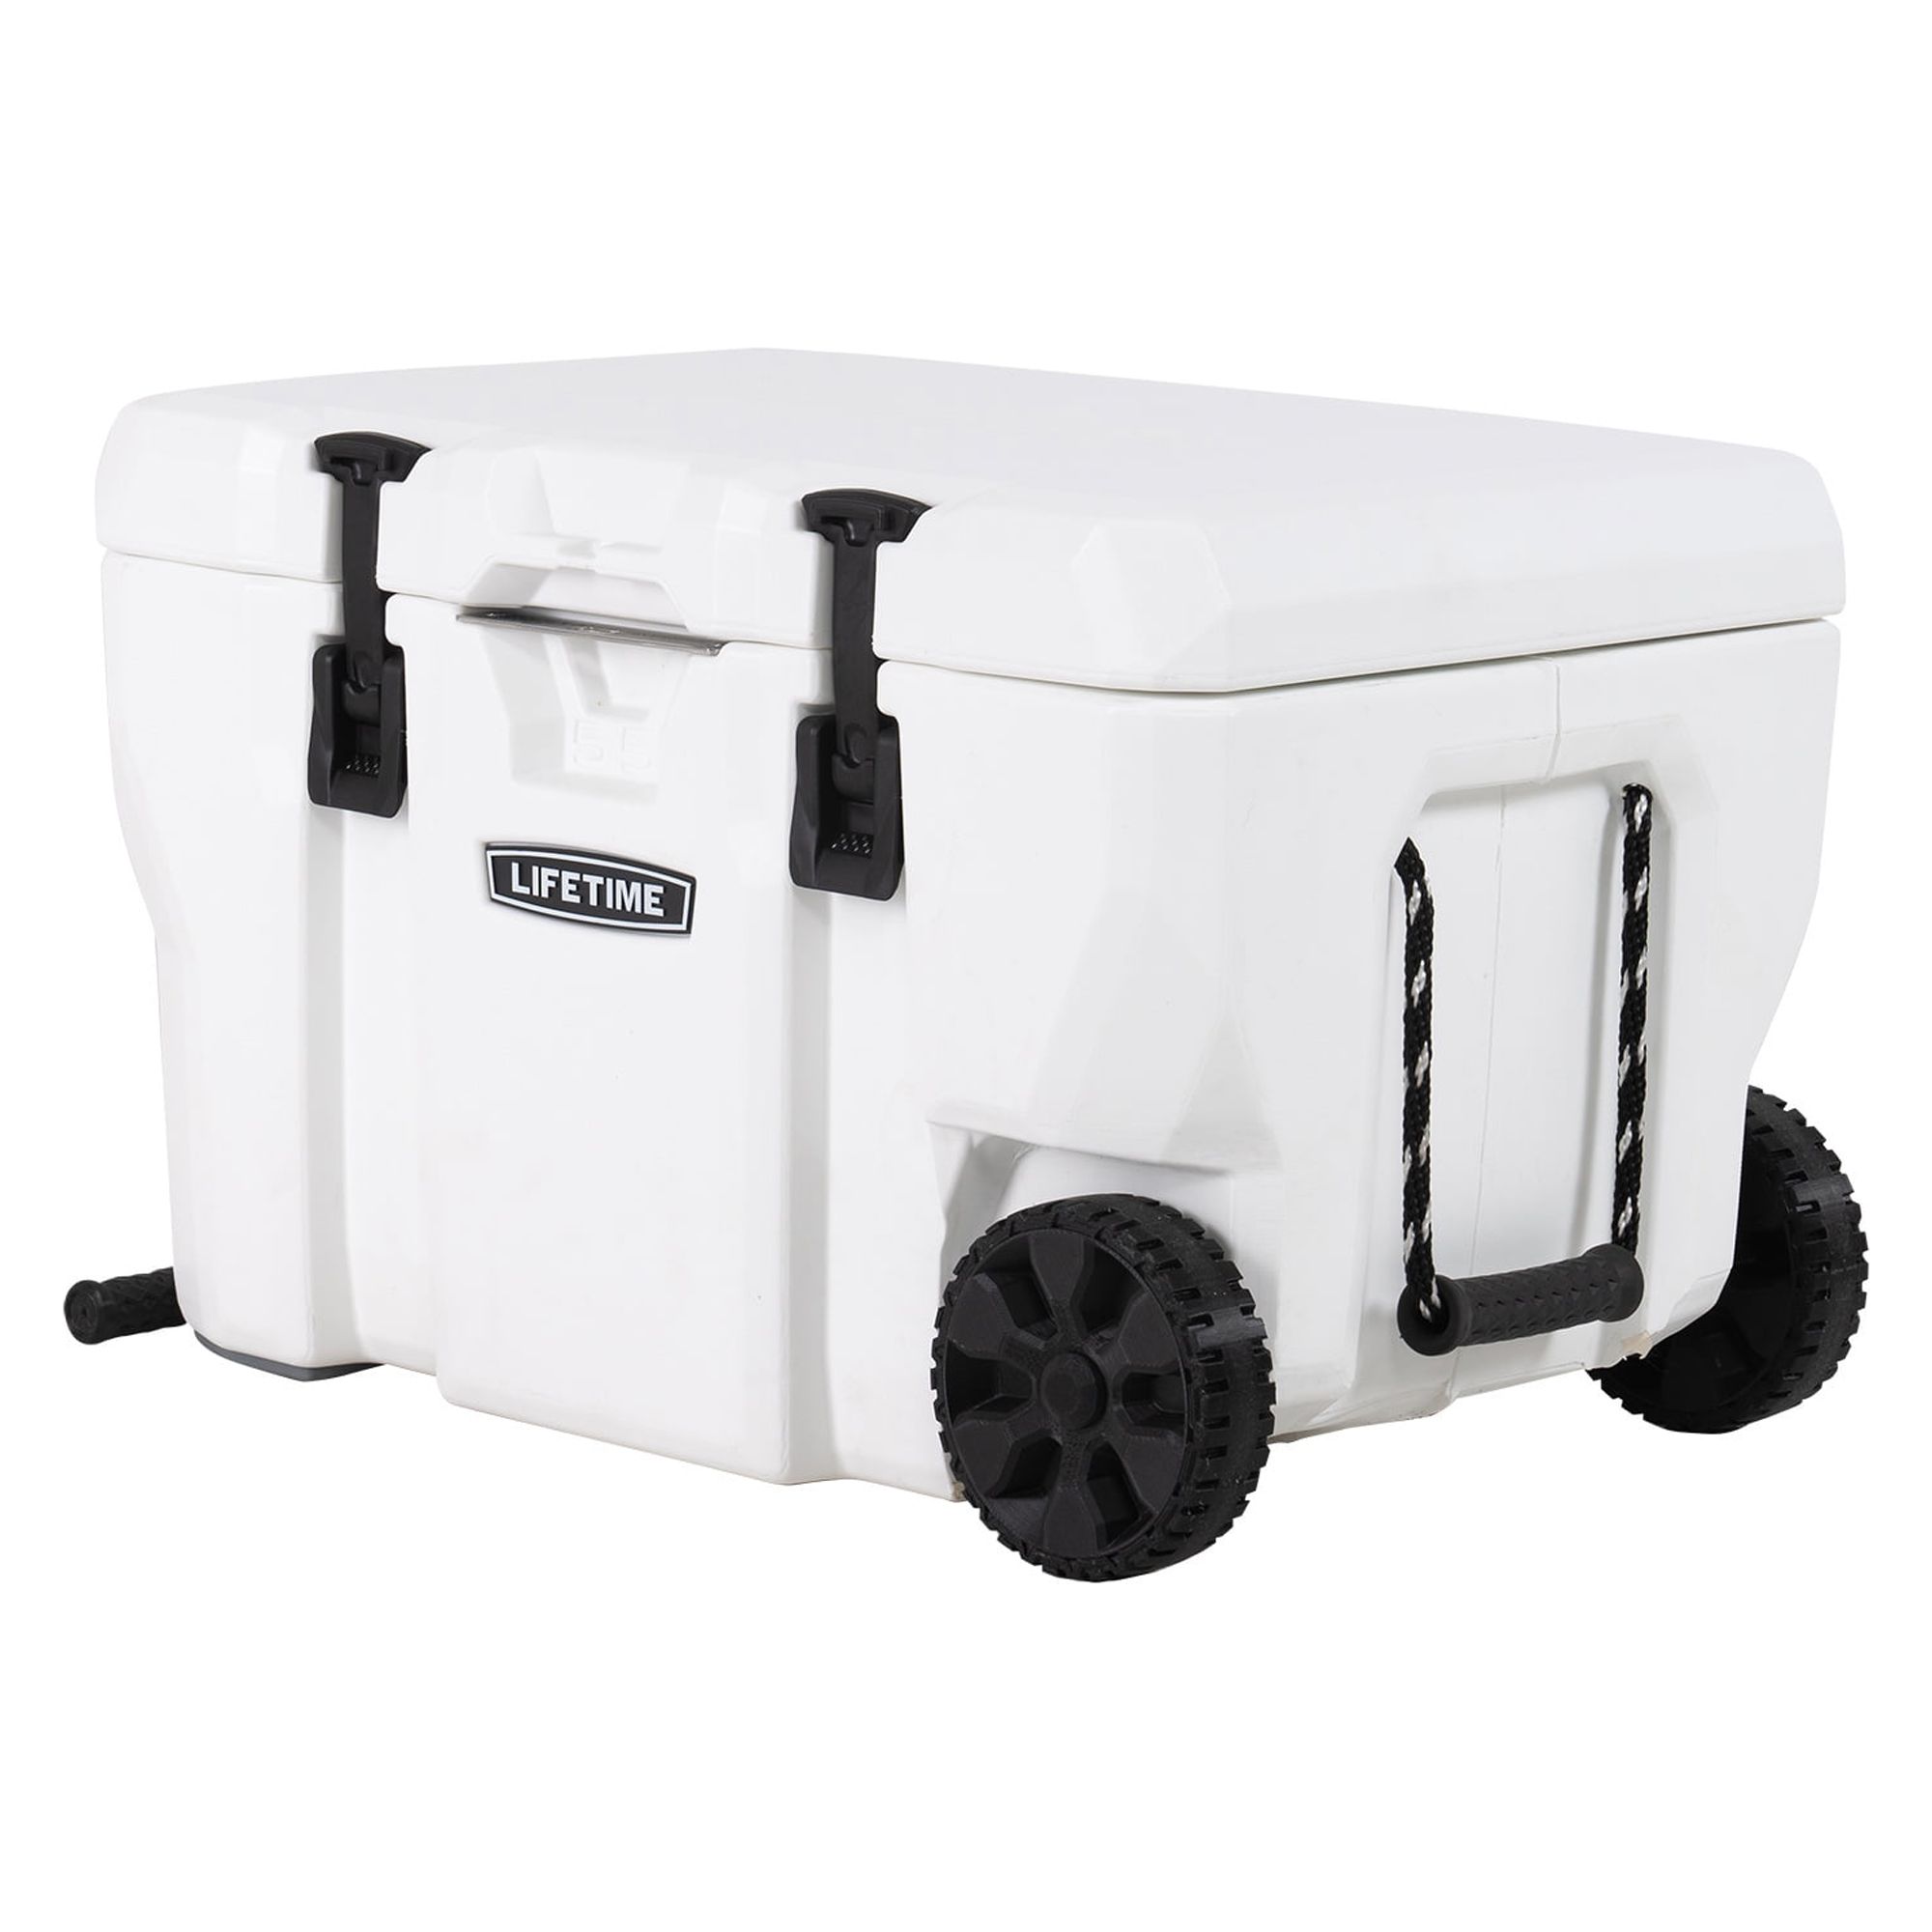 Lifetime 55 Quart High Performance Cooler with Wheels (91072) - image 1 of 11